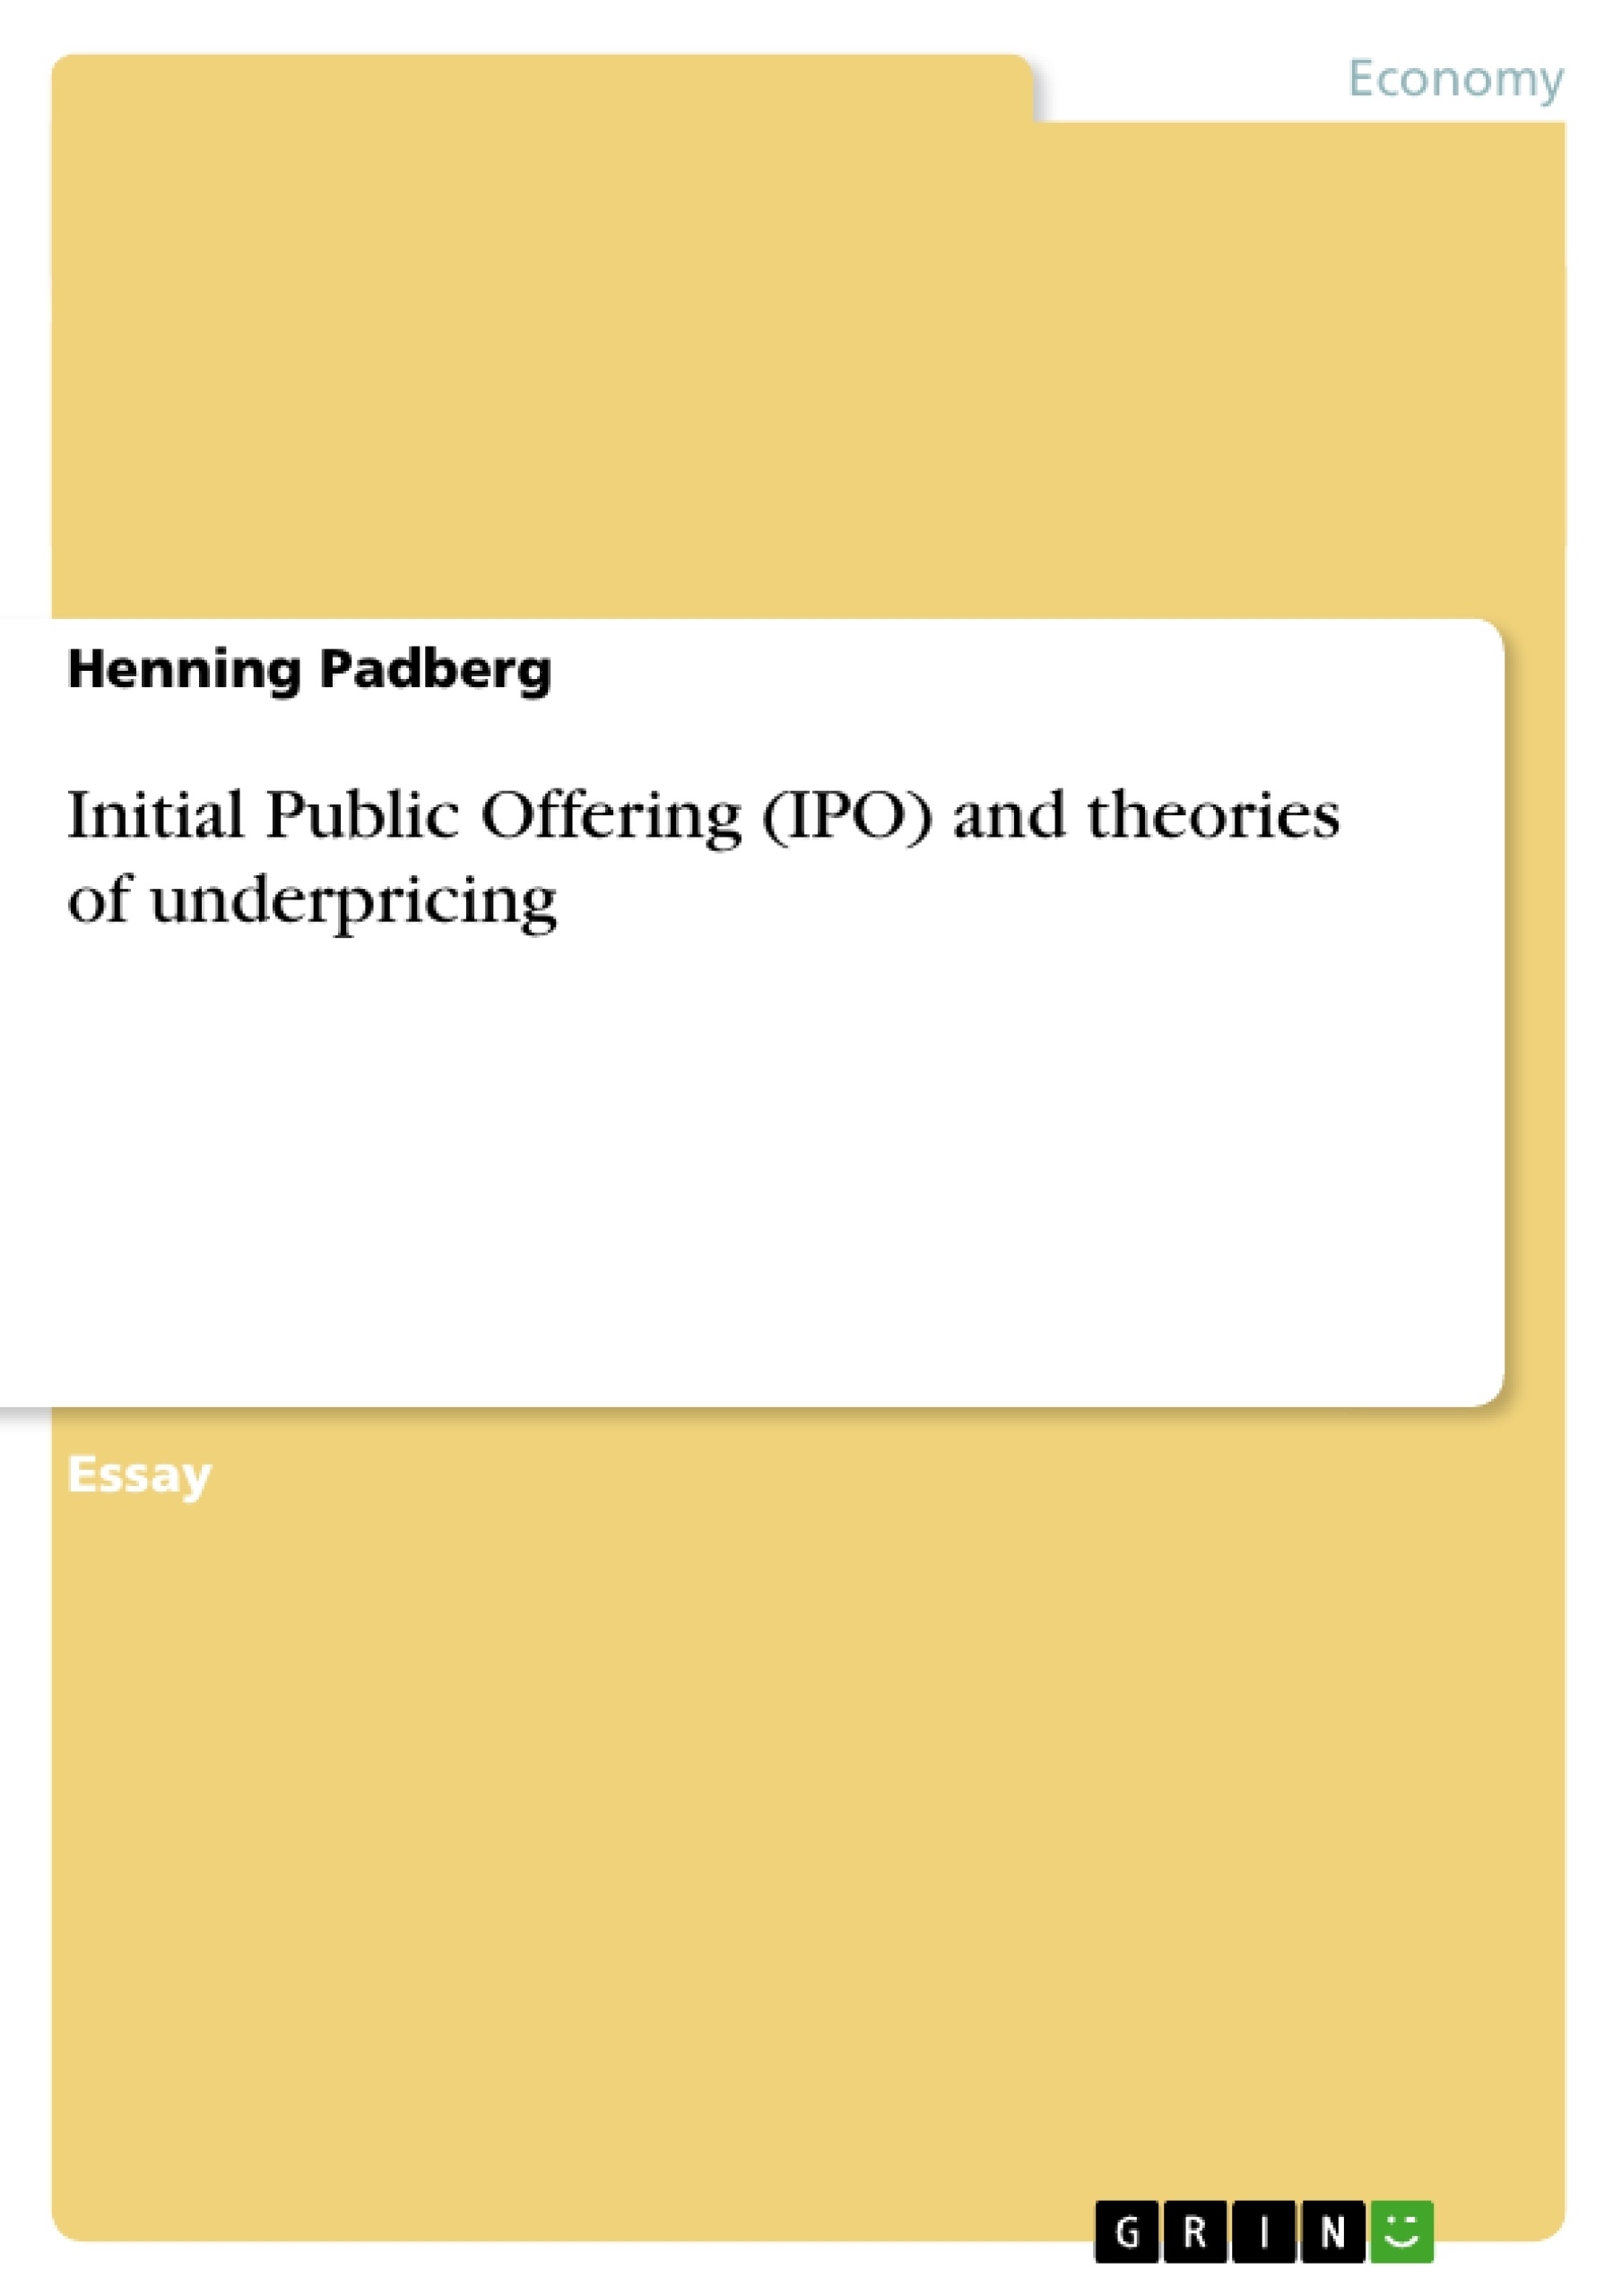 Title: Initial Public Offering (IPO) and theories of underpricing